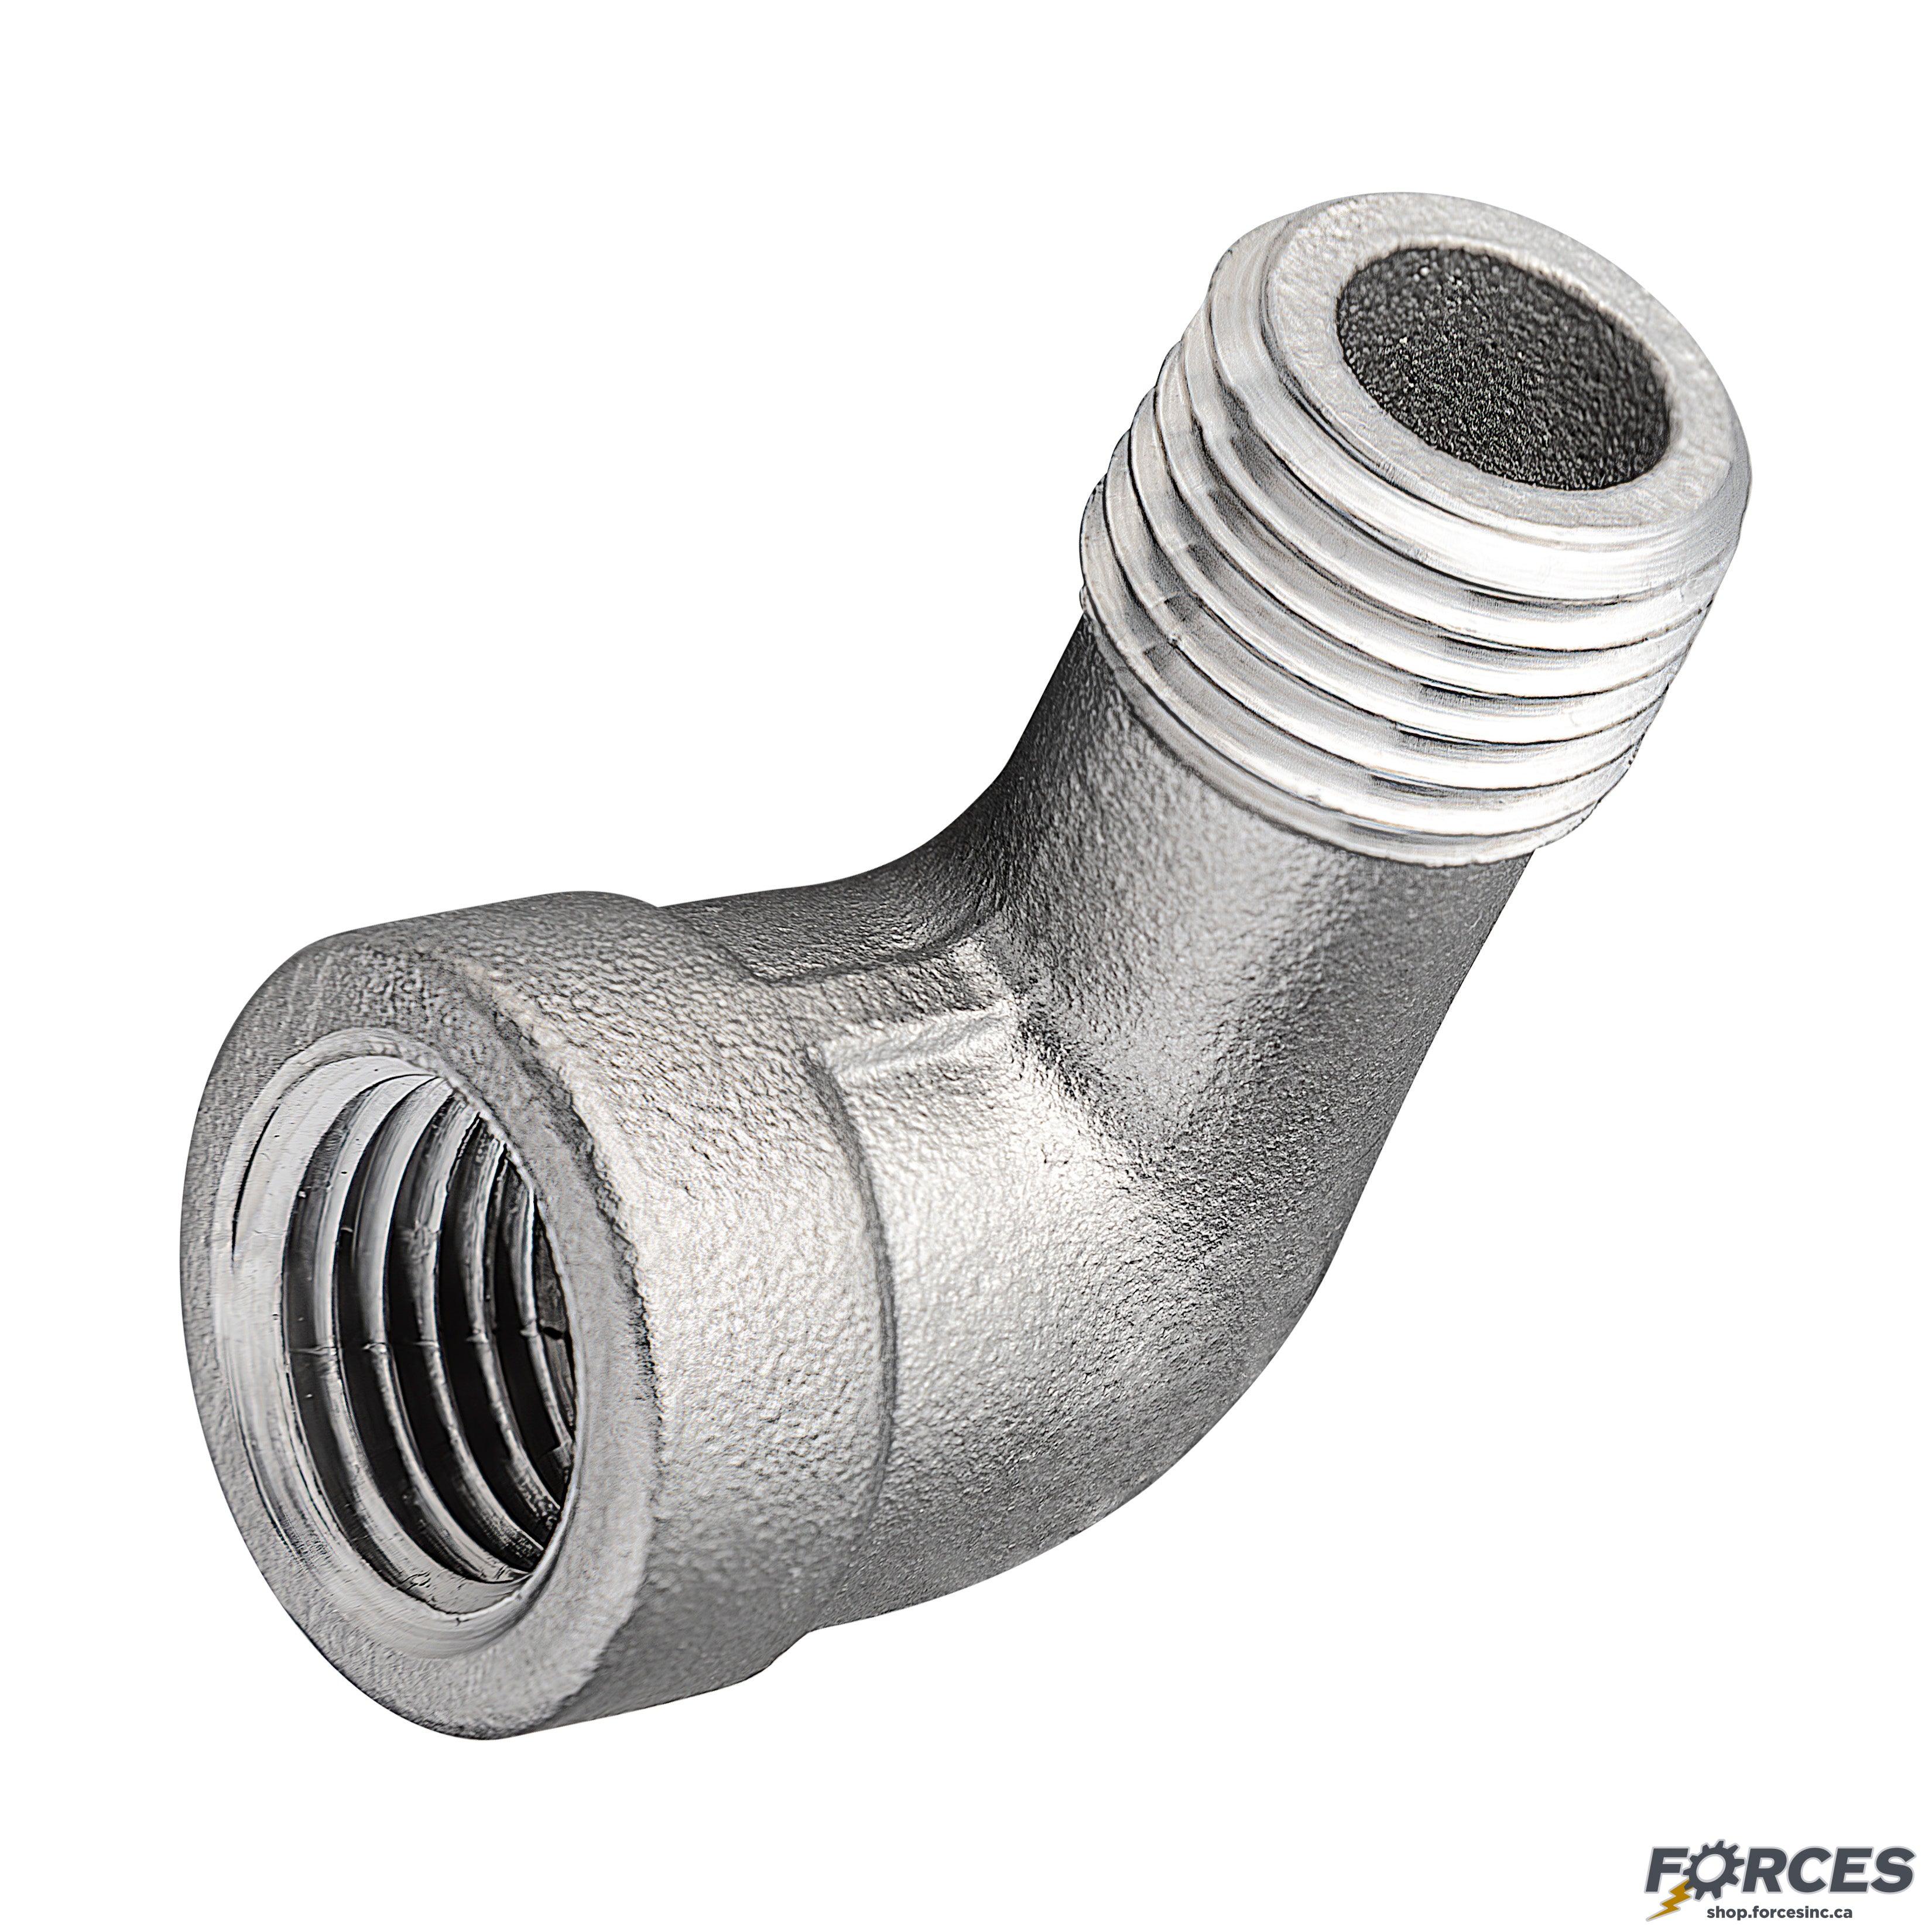 1/2" Street Elbow 90° NPT #150 - Stainless Steel 316 - Forces Inc